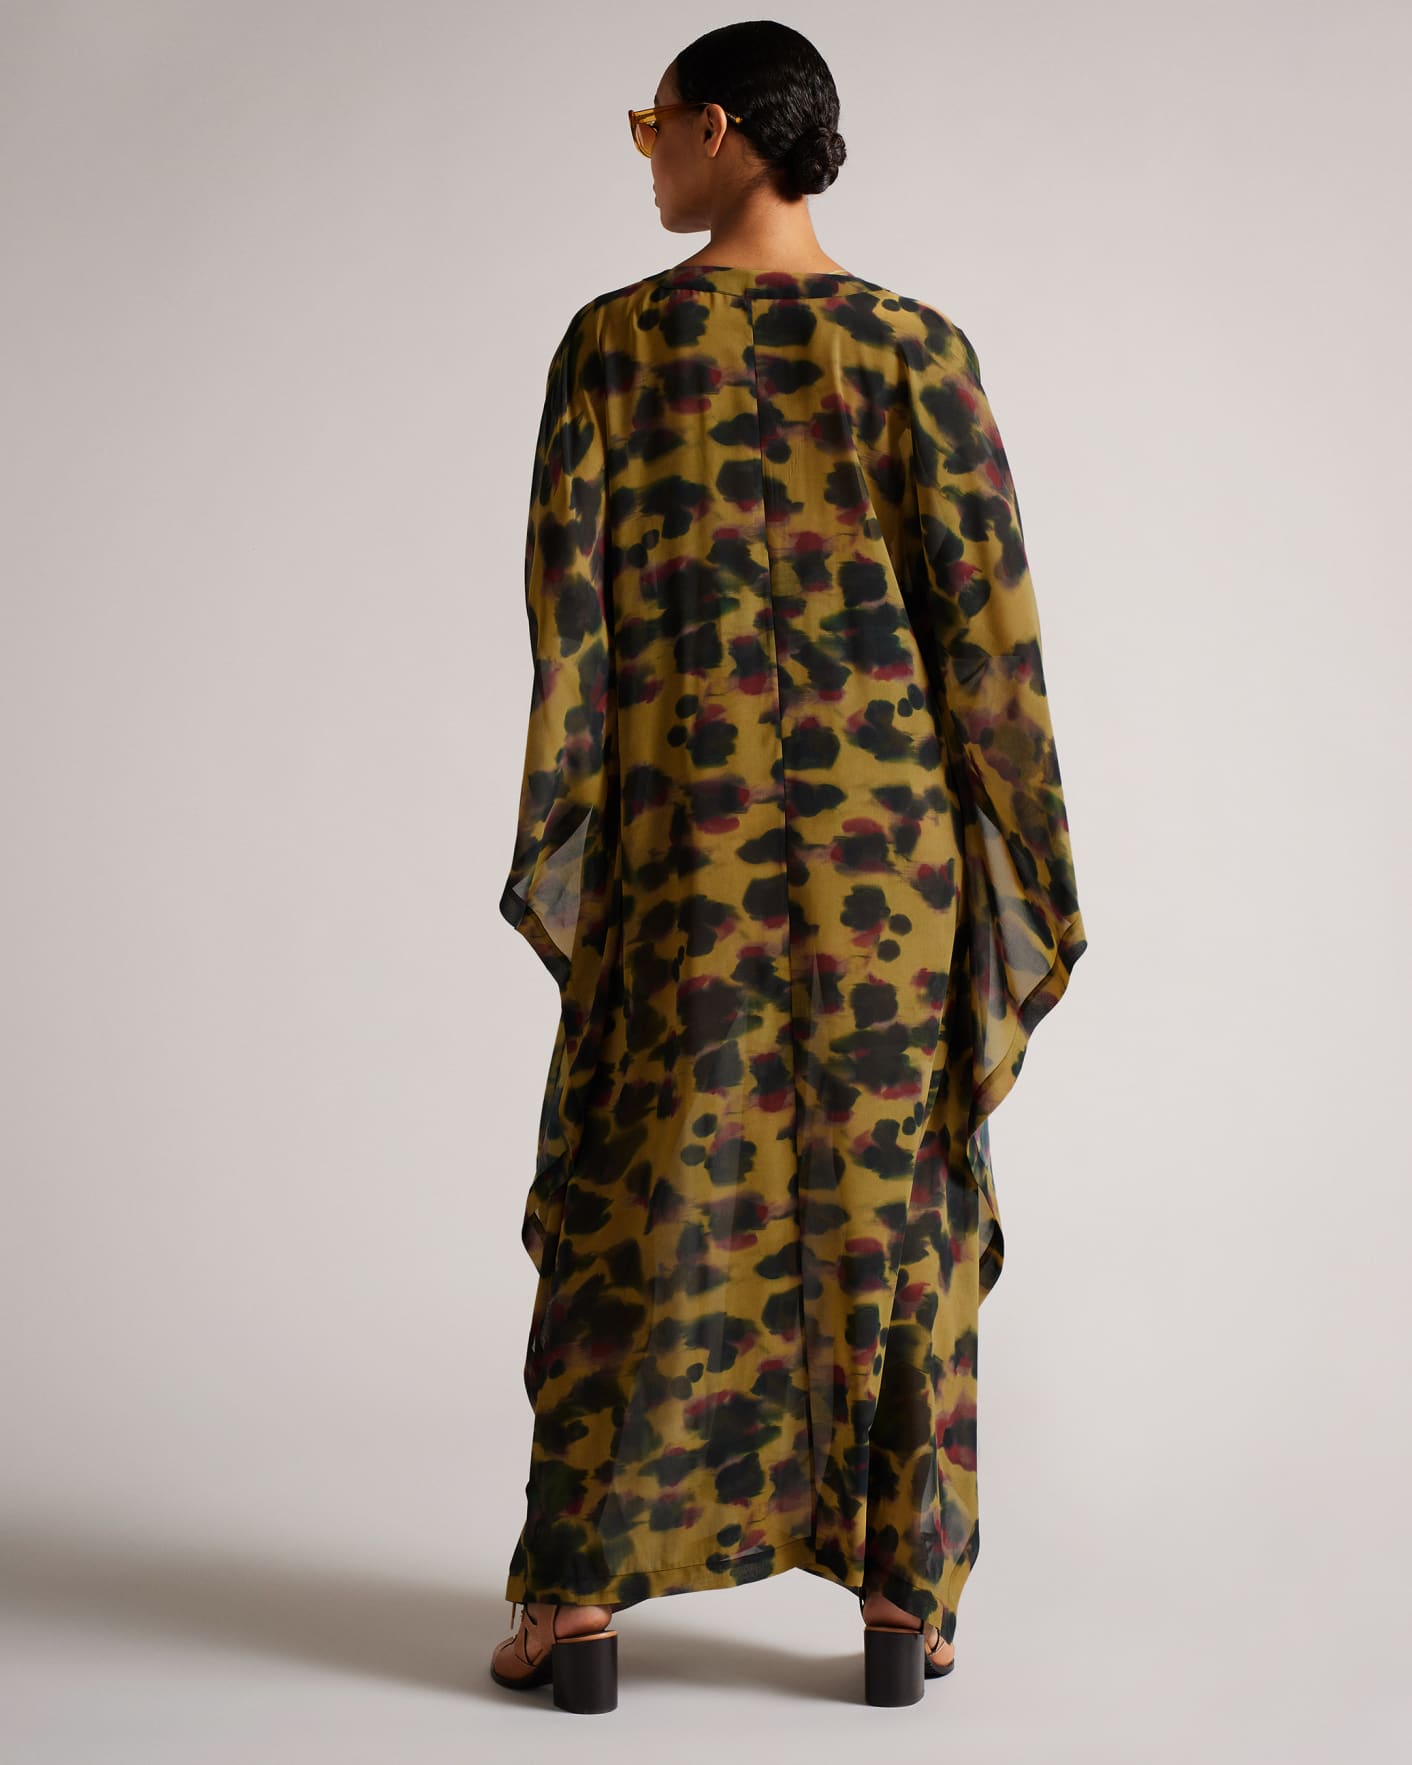 Brown Leopard Print Beach Cover Up  Ted Baker